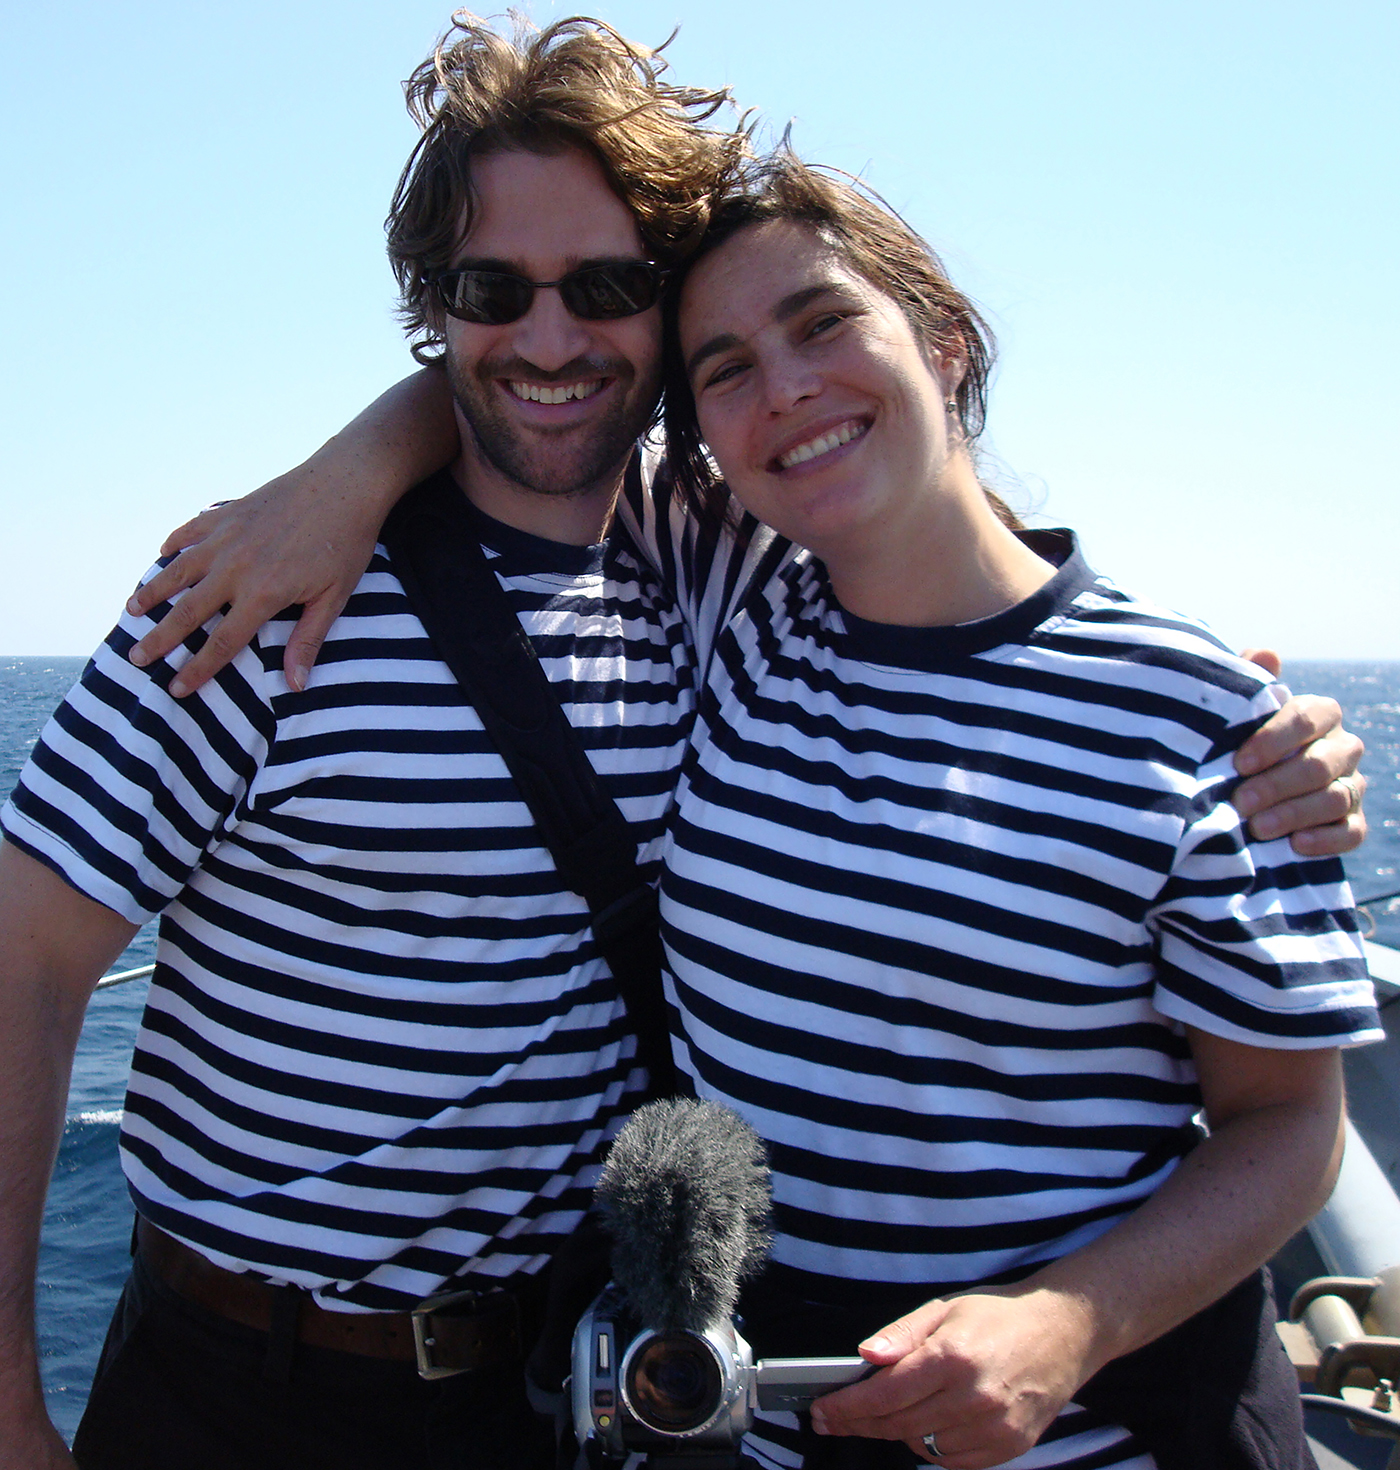 Courtenay was never a big fan of the uniform but occasionally humored me. On a pirate patrol in the Arabian Sea, 2008. We thought the sailor motif was appropriate.